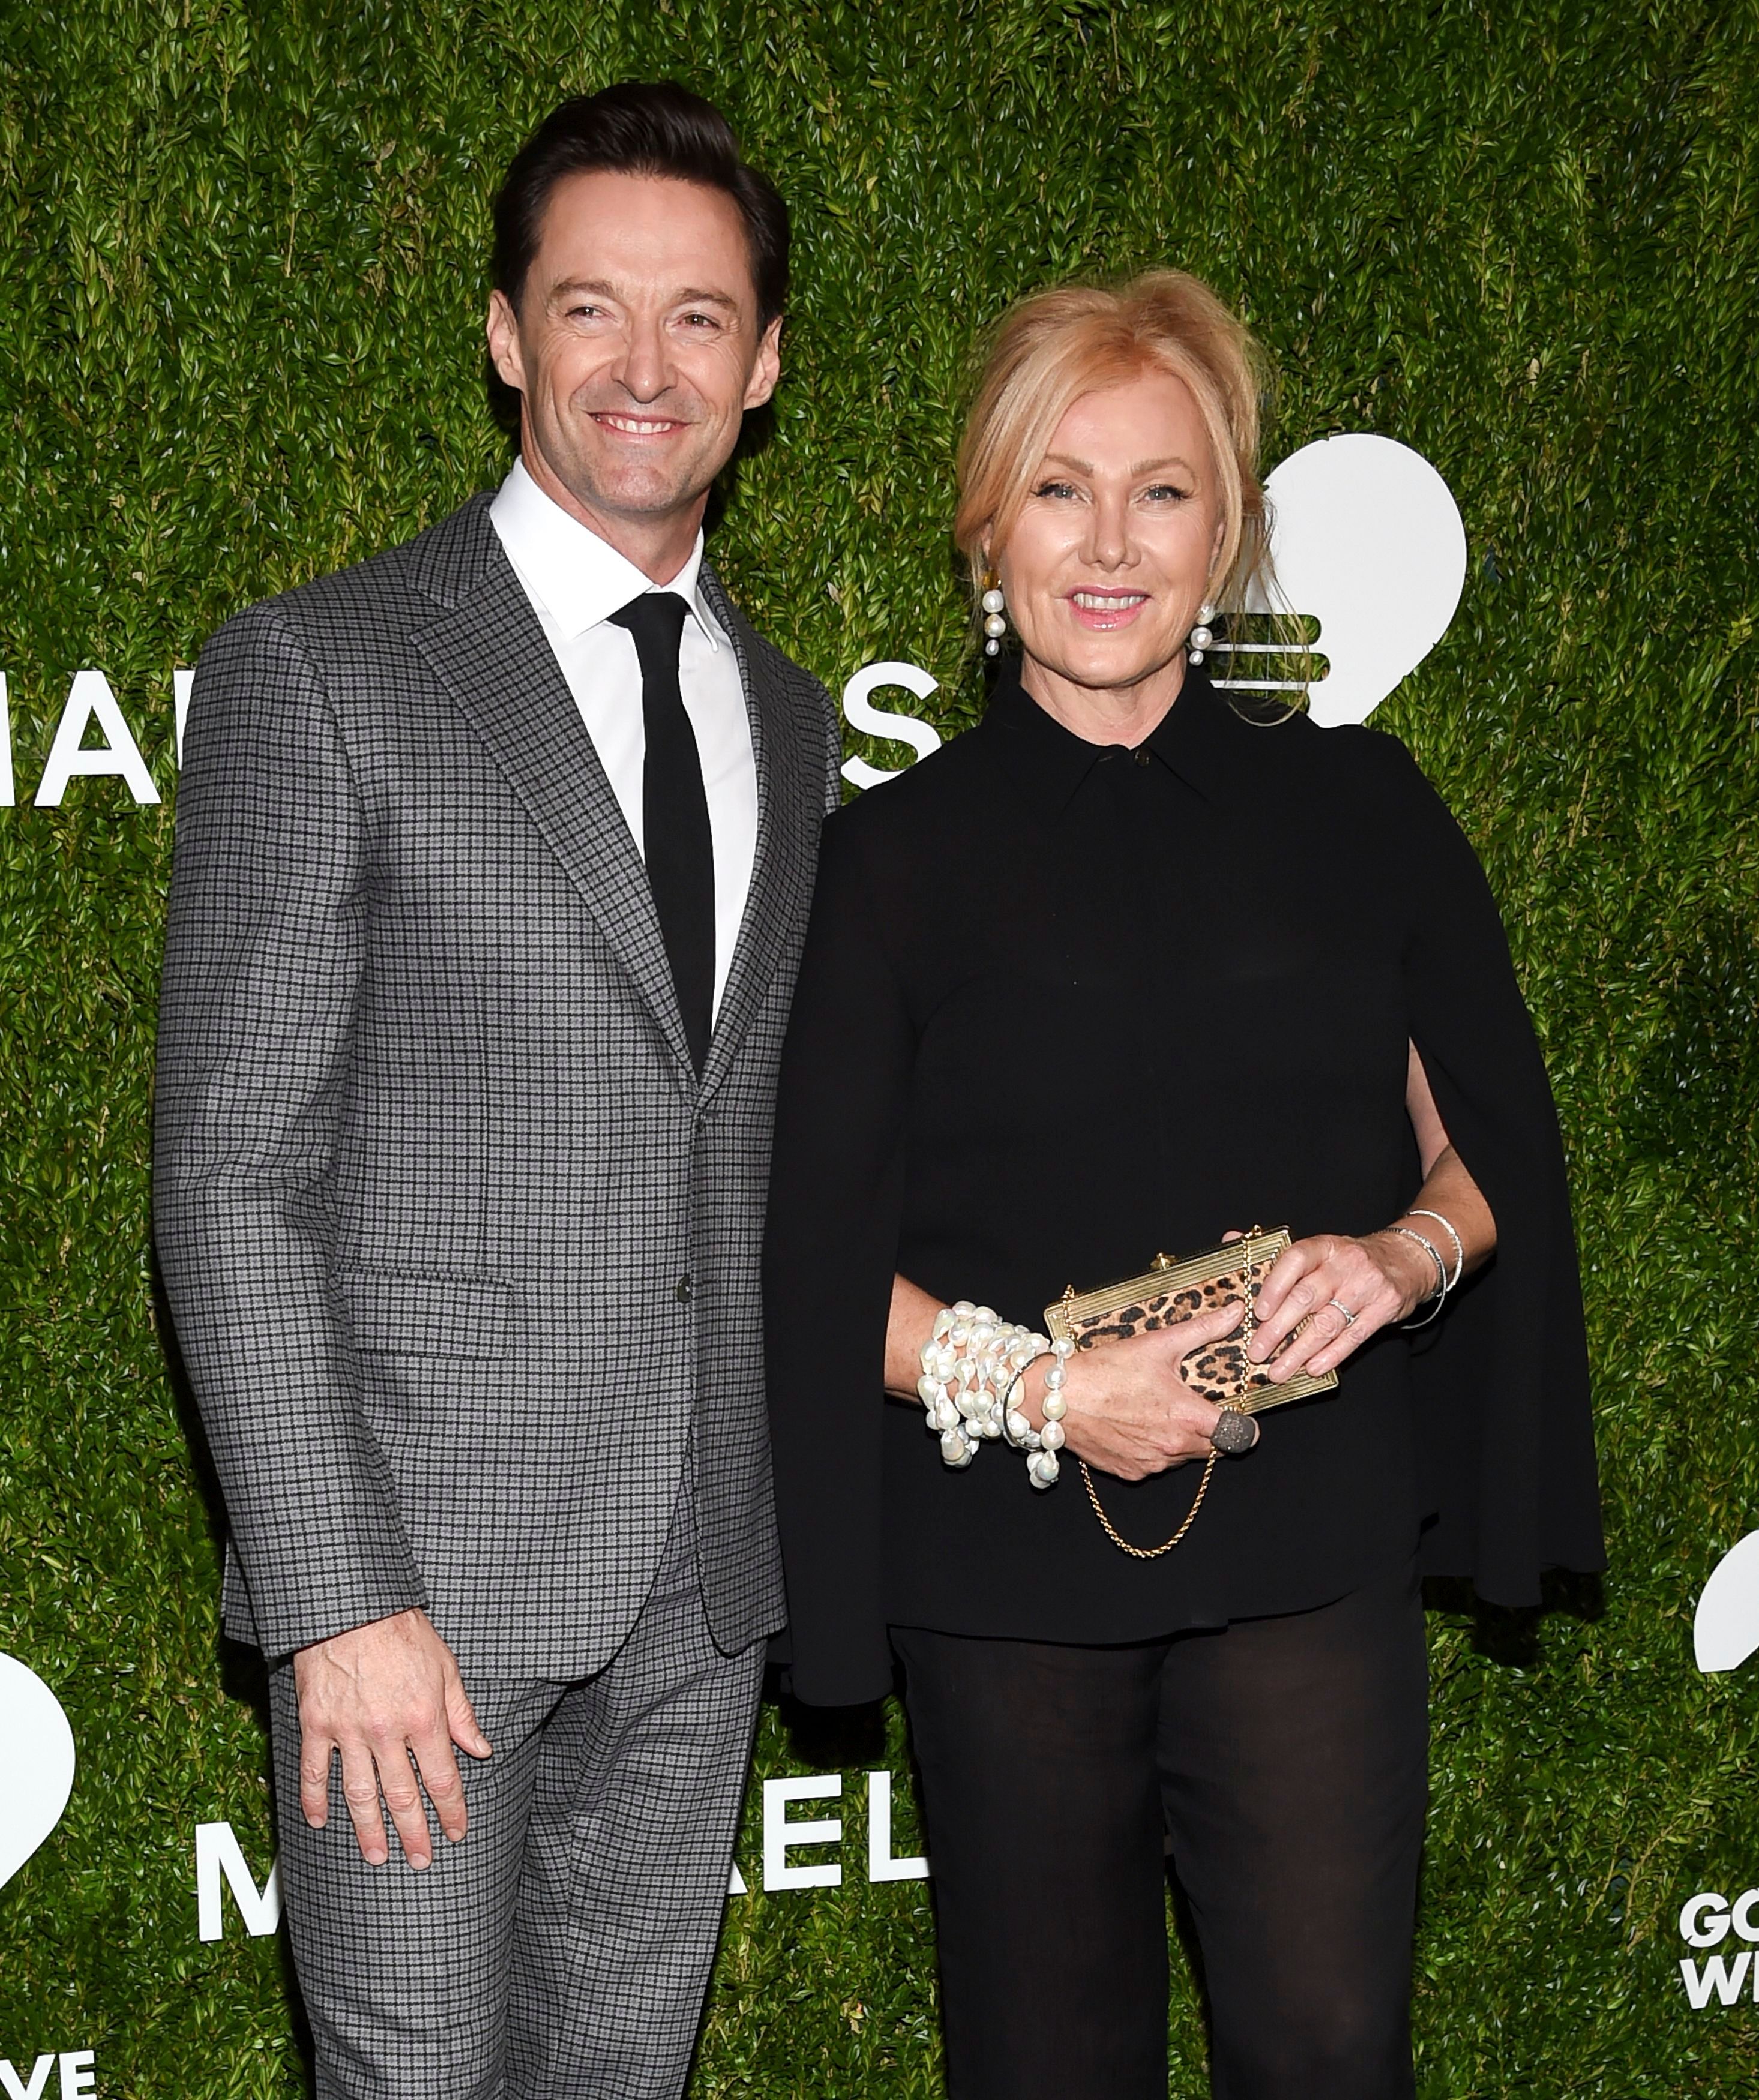 Deborra-Lee Furness on When She Knew Hugh Jackman Was 'The One'